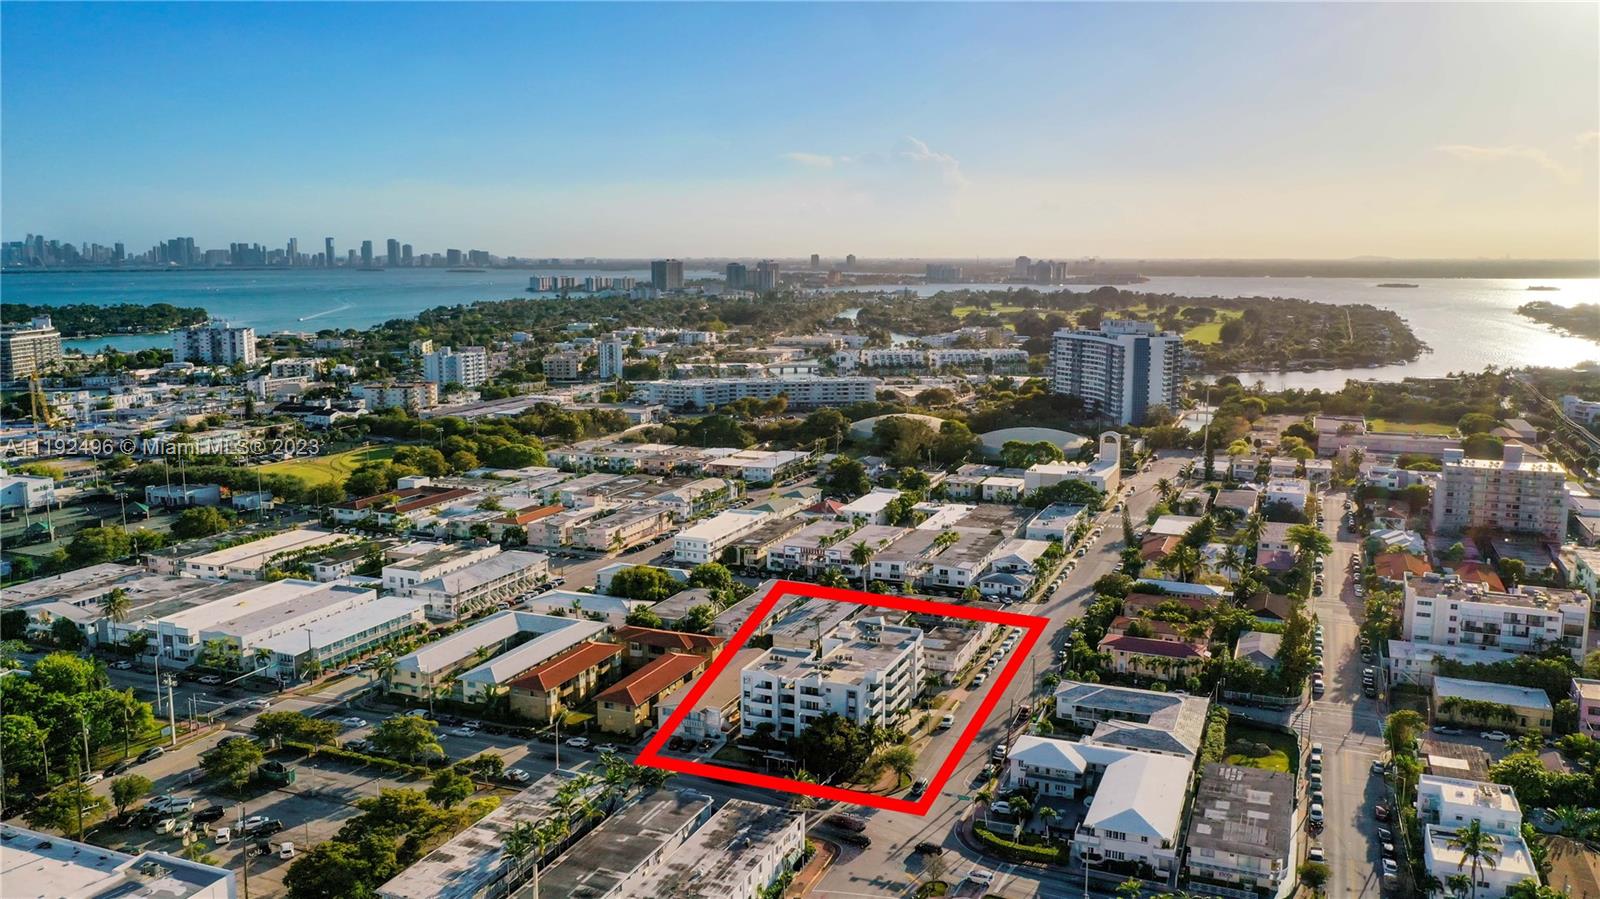 7440 Harding Ave 503, Miami Beach, FL 33141, 1 Bedroom Bedrooms, ,1 BathroomBathrooms,Residential,For Sale,Harding Ave,A11192496